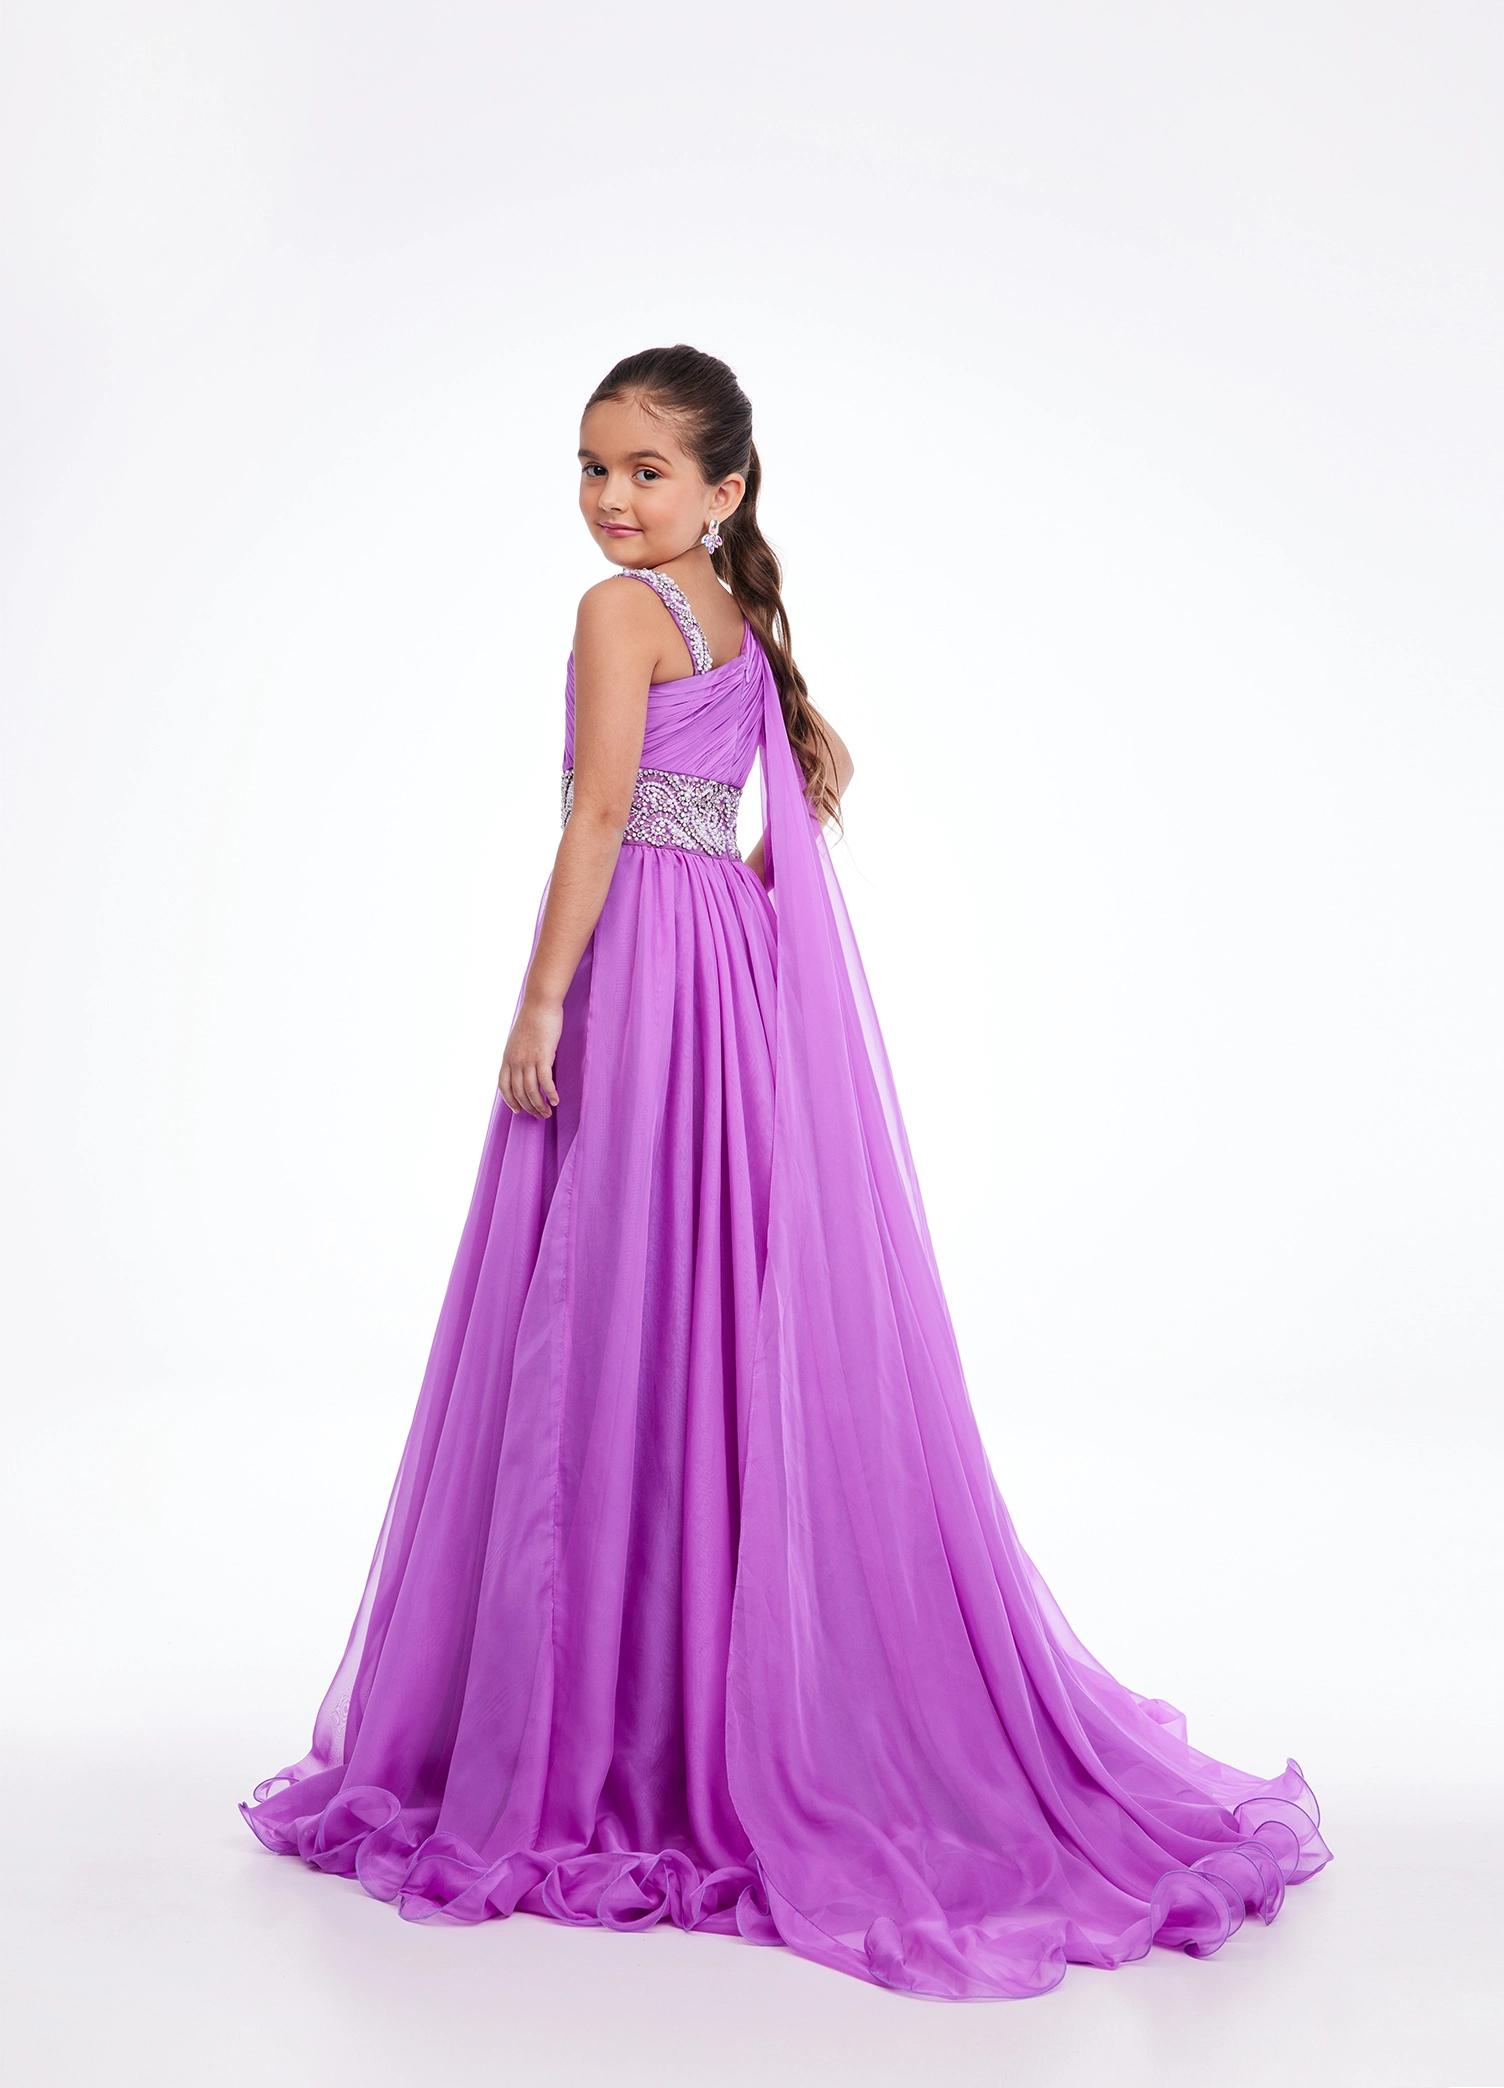 Best Pageant Dresses For Teens in 2015